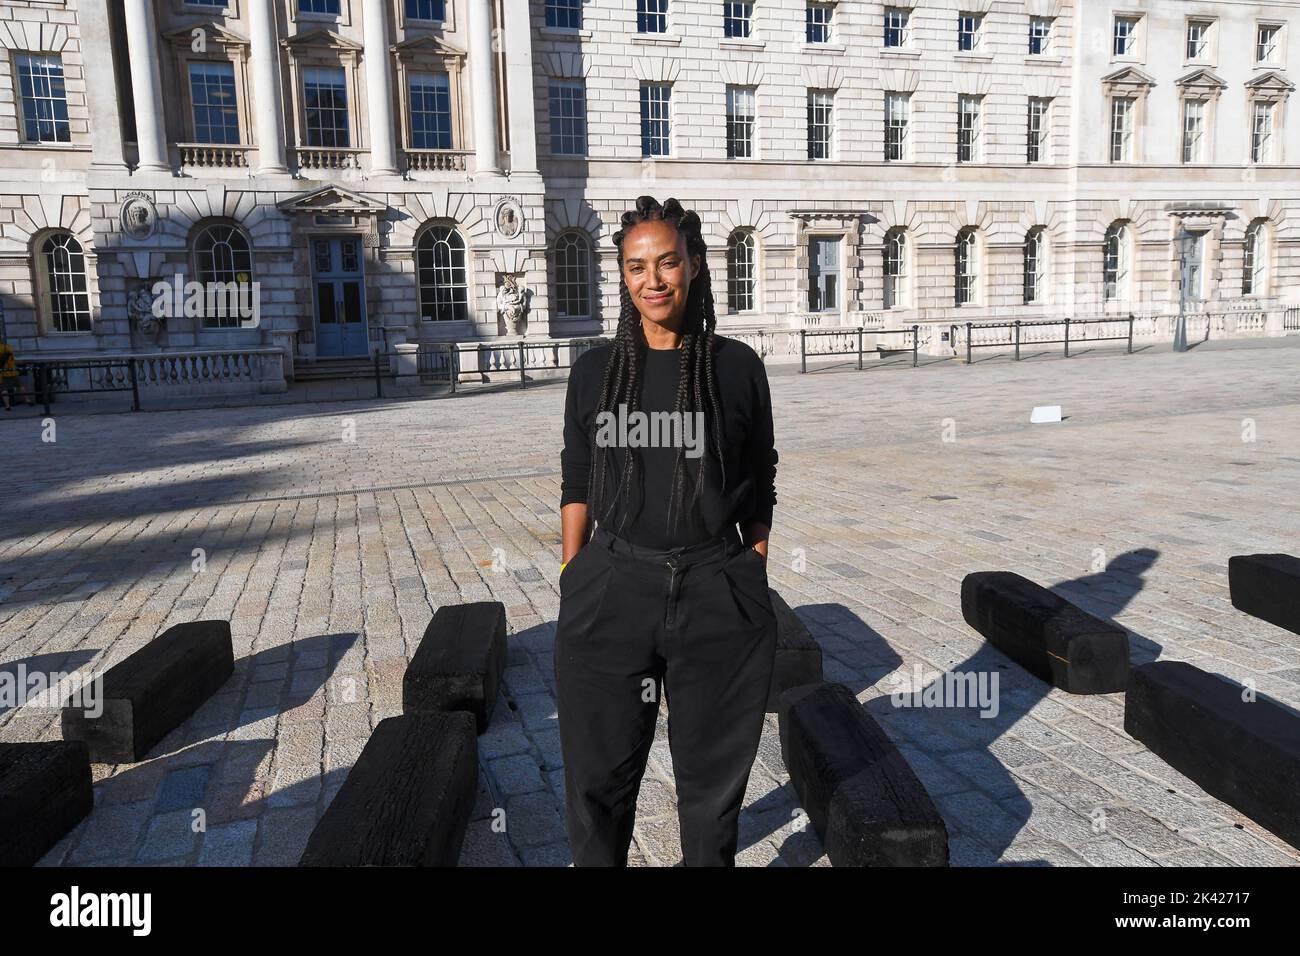 London, UK, 29/09/2022, O Barco/The Boat, large-scale installation by transdisciplinary artist Grada Kilomba, opens at Somerset House in London, to mark the 10th anniversary of 1-54 Contemporary African Art Fair. Formed of 140 wood blocks the 32-metre-long installation draws attention to the forgotten stories and identities of those who suffered during European maritime expansion and colonisation. Stock Photo